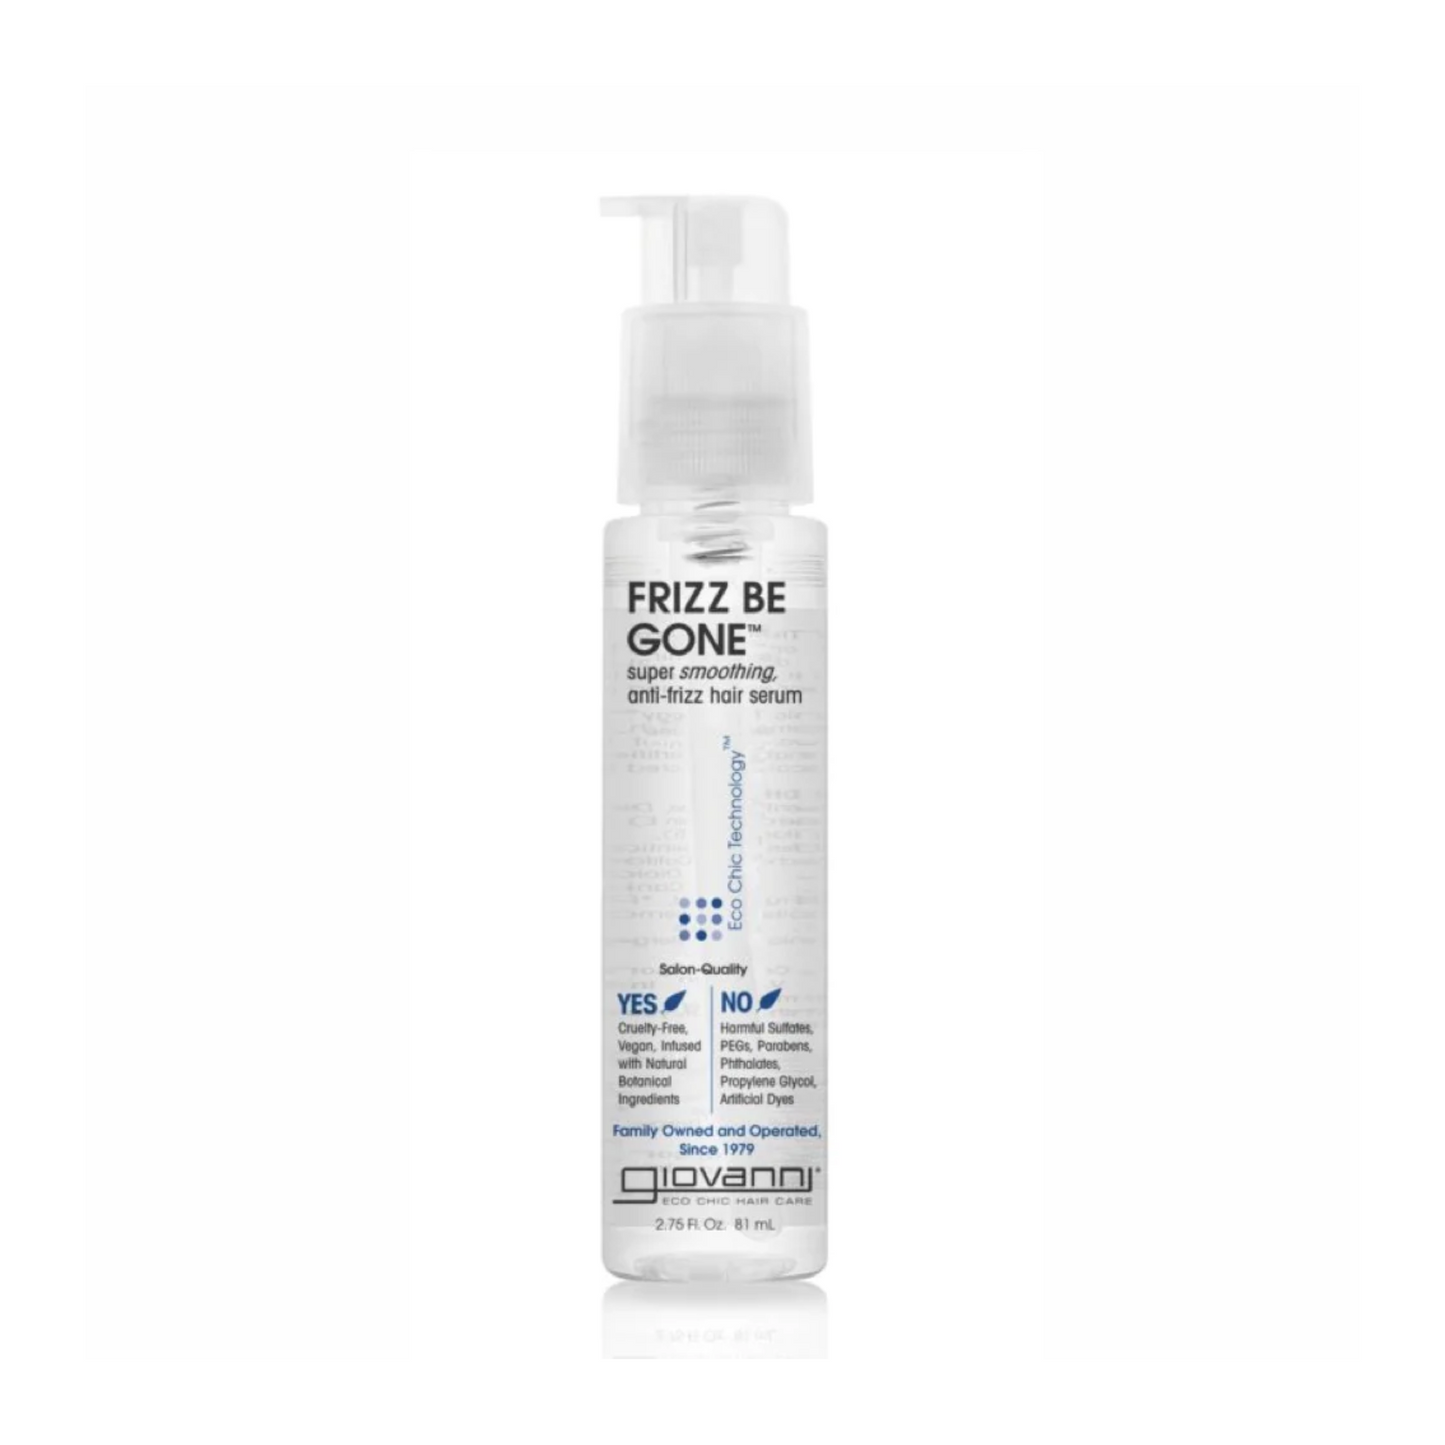 Giovanni Frizz Be Gone Super-Smoothing Anti-Frizz Hair Serum 81ml, Smooths & Detangles